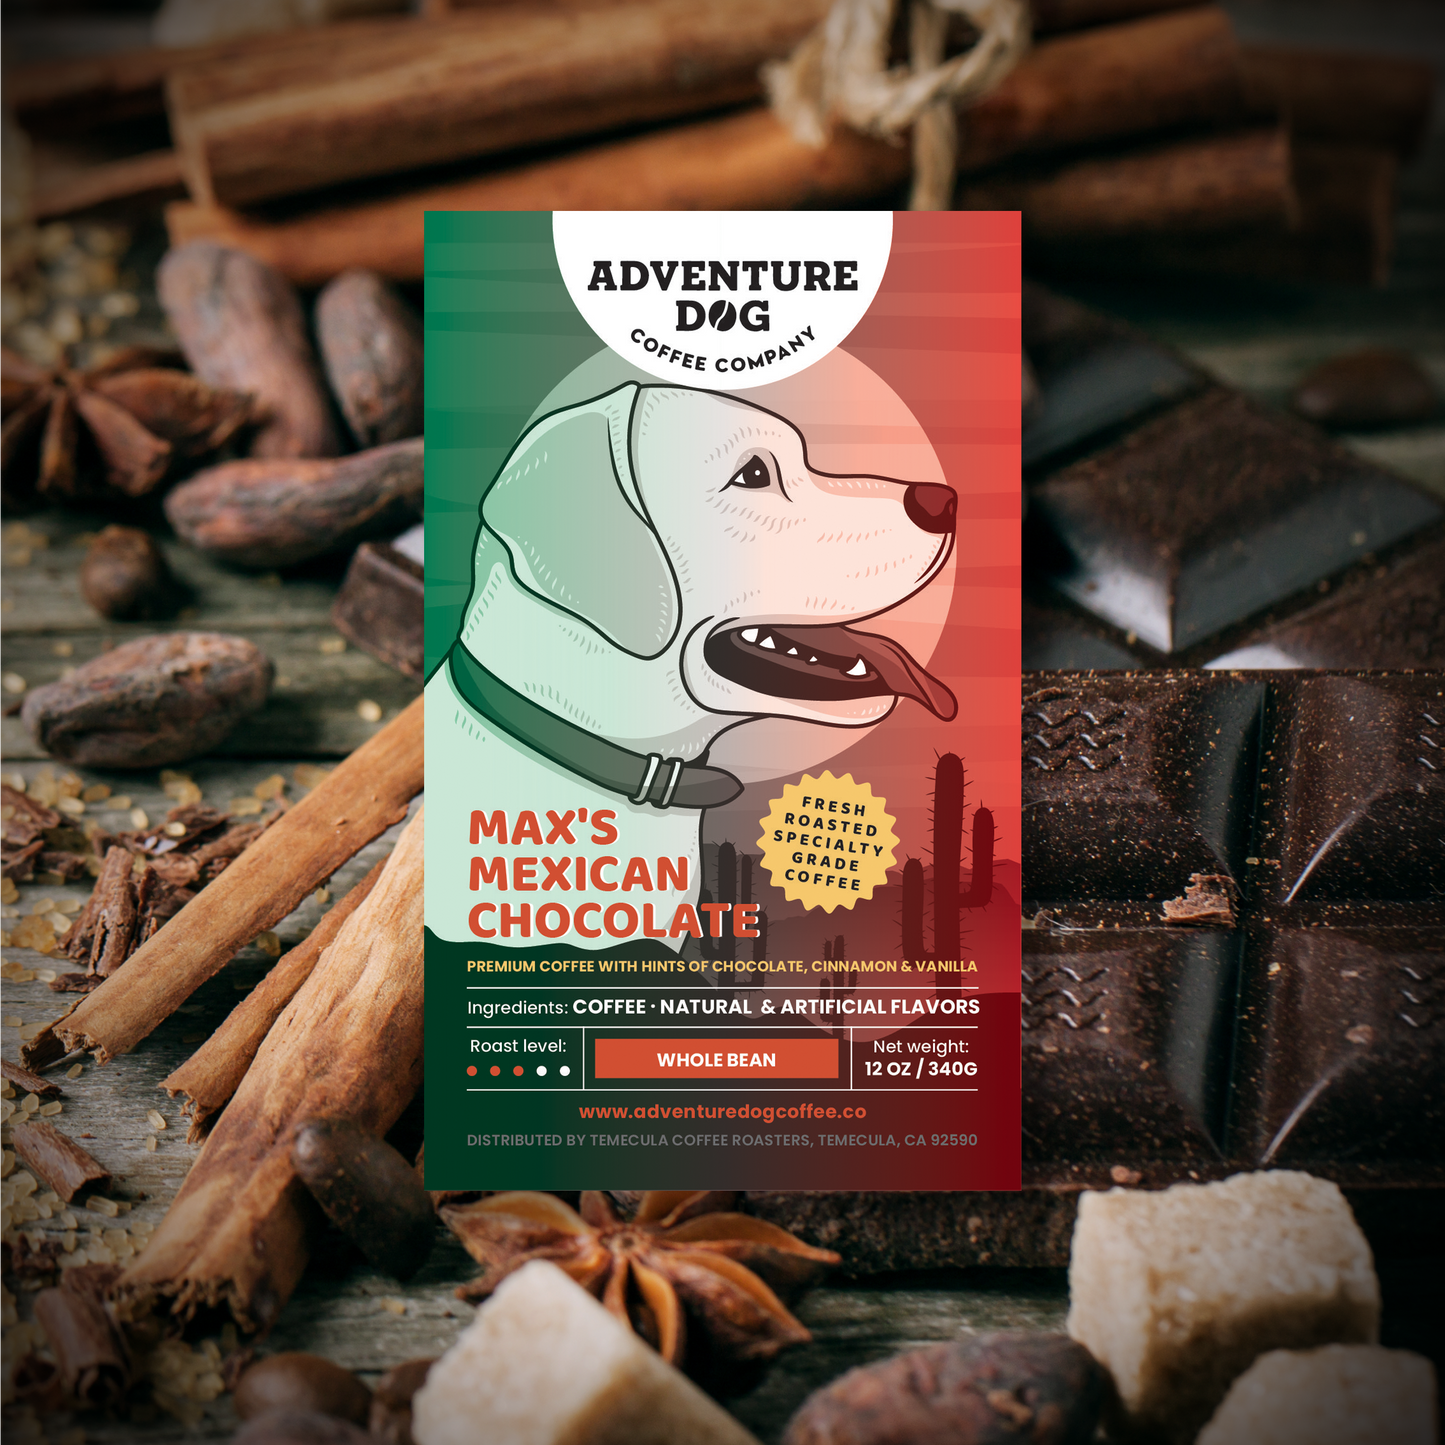 Adventure Dog Coffee Co.'s Max the Yellow Labrador Retriever featured on the label of Max's Mexican Chocolate, a medium roast Arabica coffee hand-flavored with chocolate, cinnamon, and vanilla oils, perfect as an after-dinner cordial.